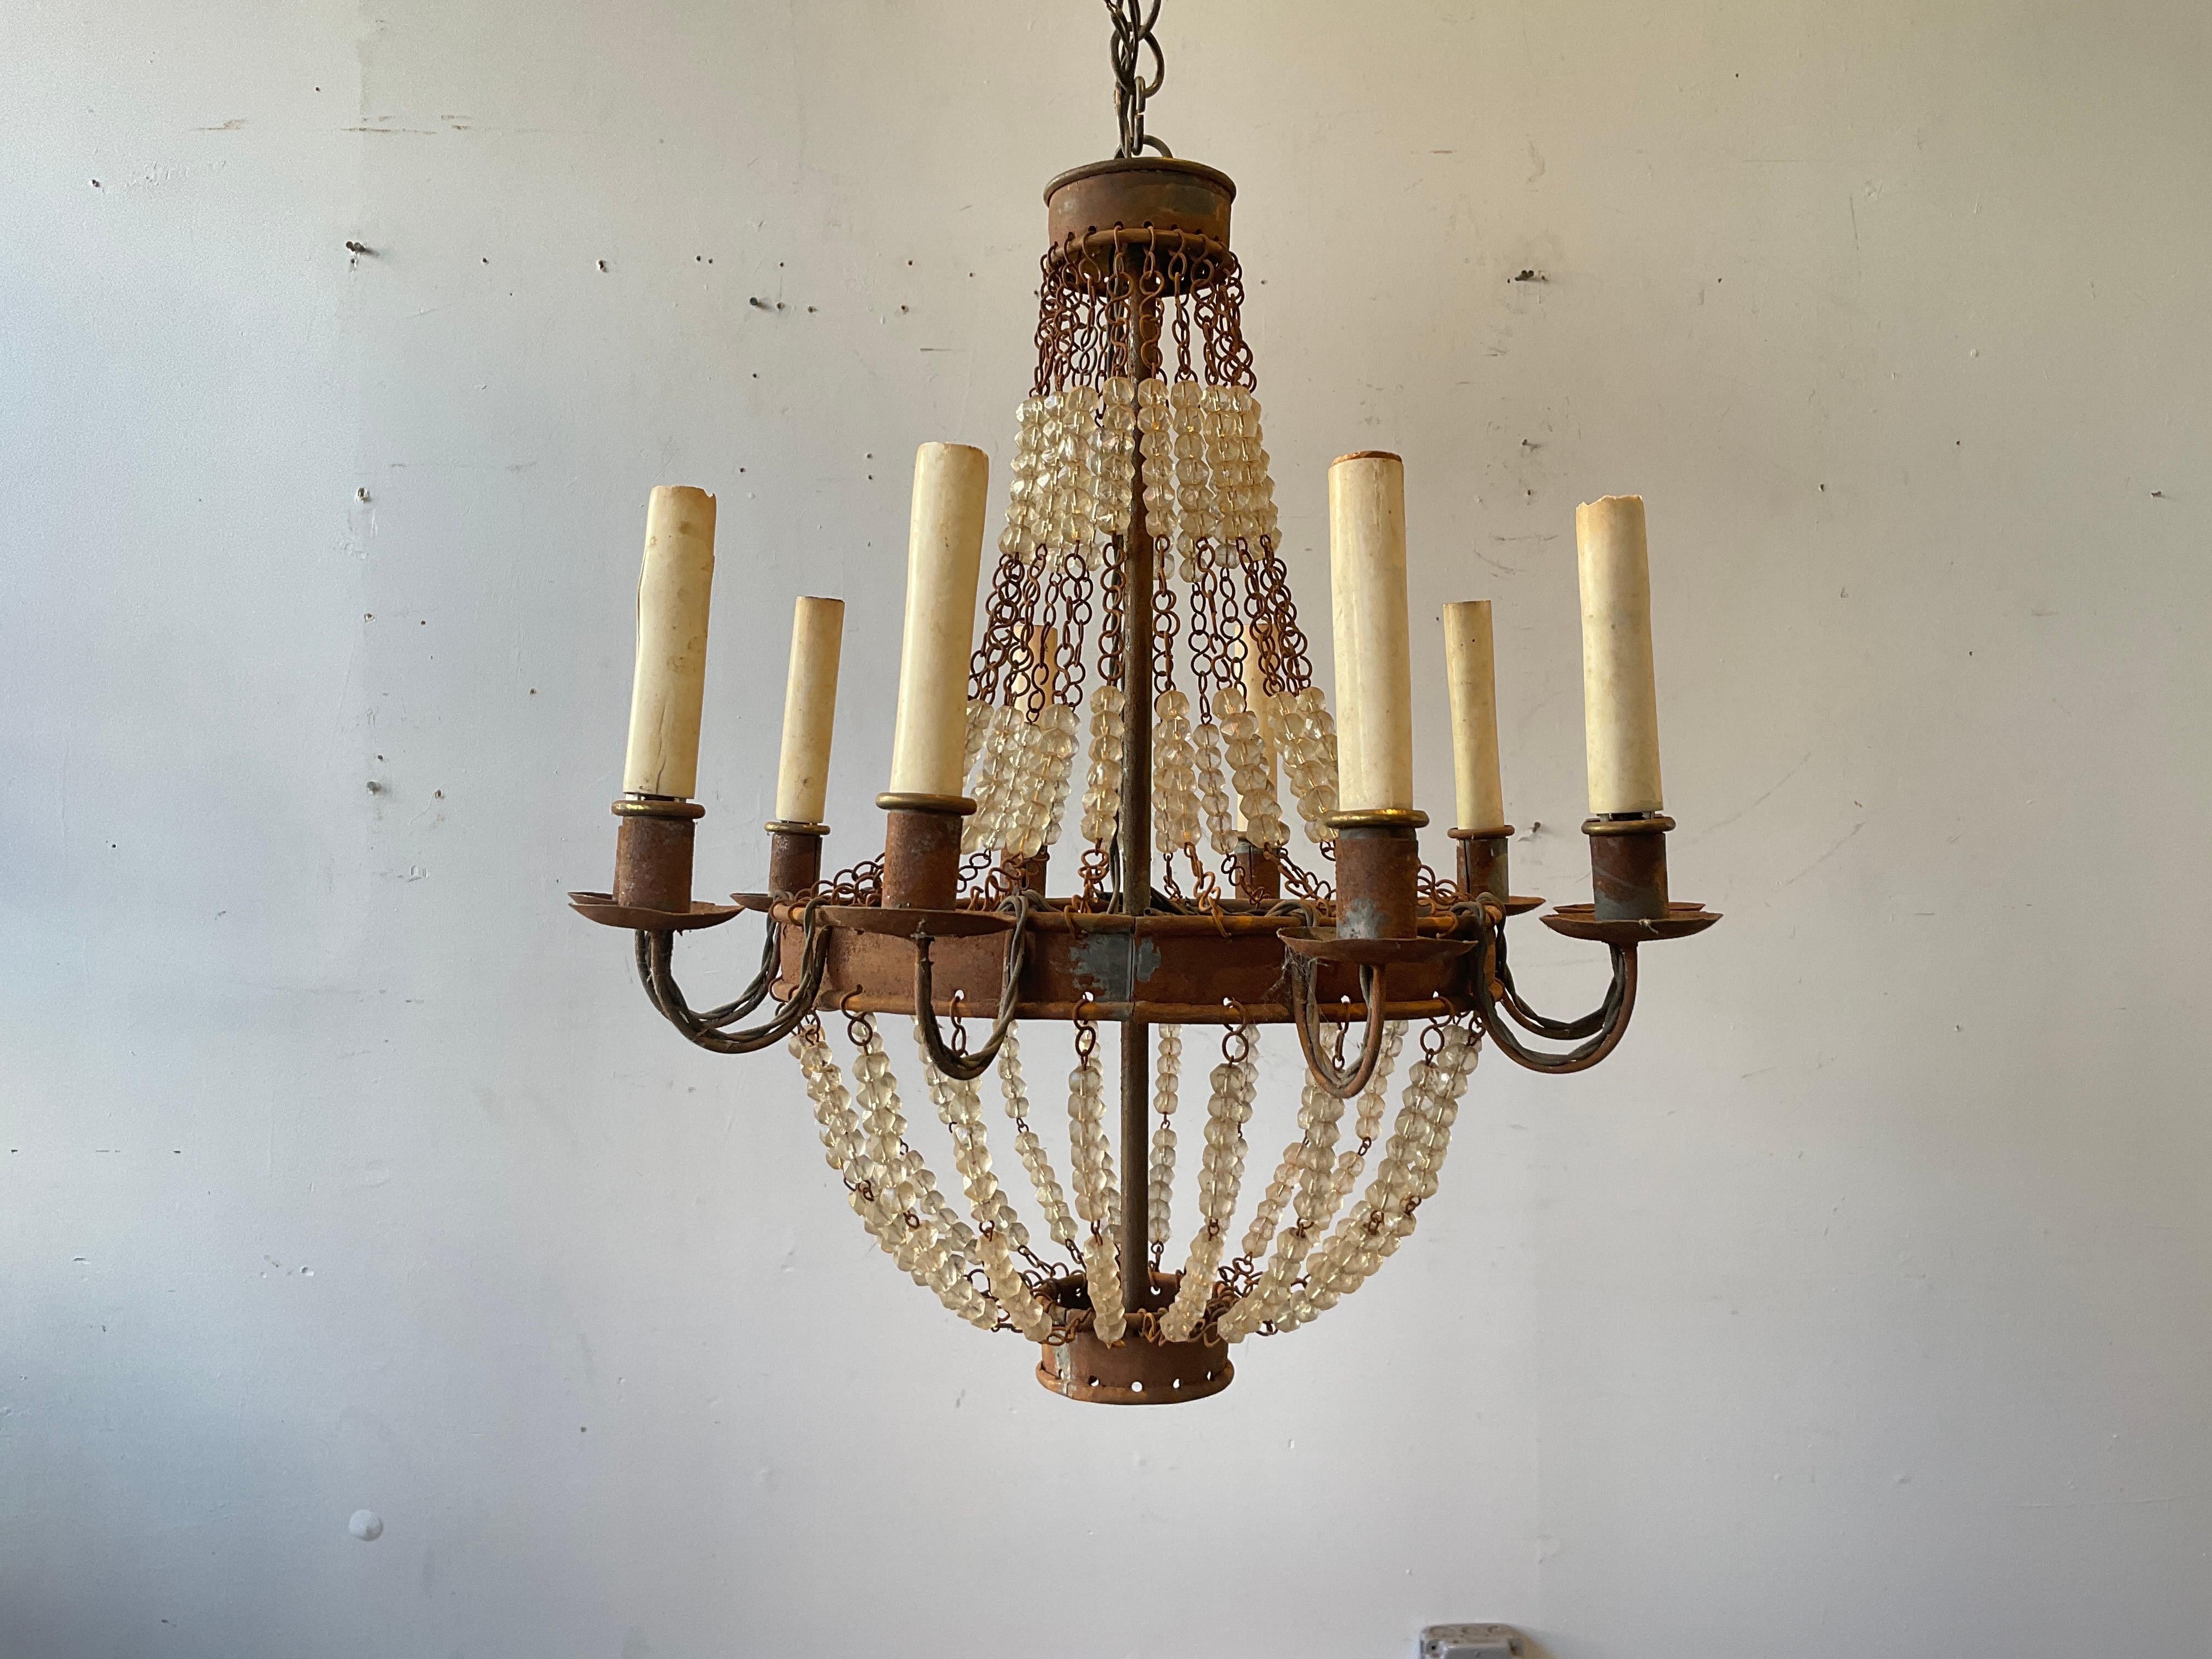 1970s French style rusted metal beaded chandelier.